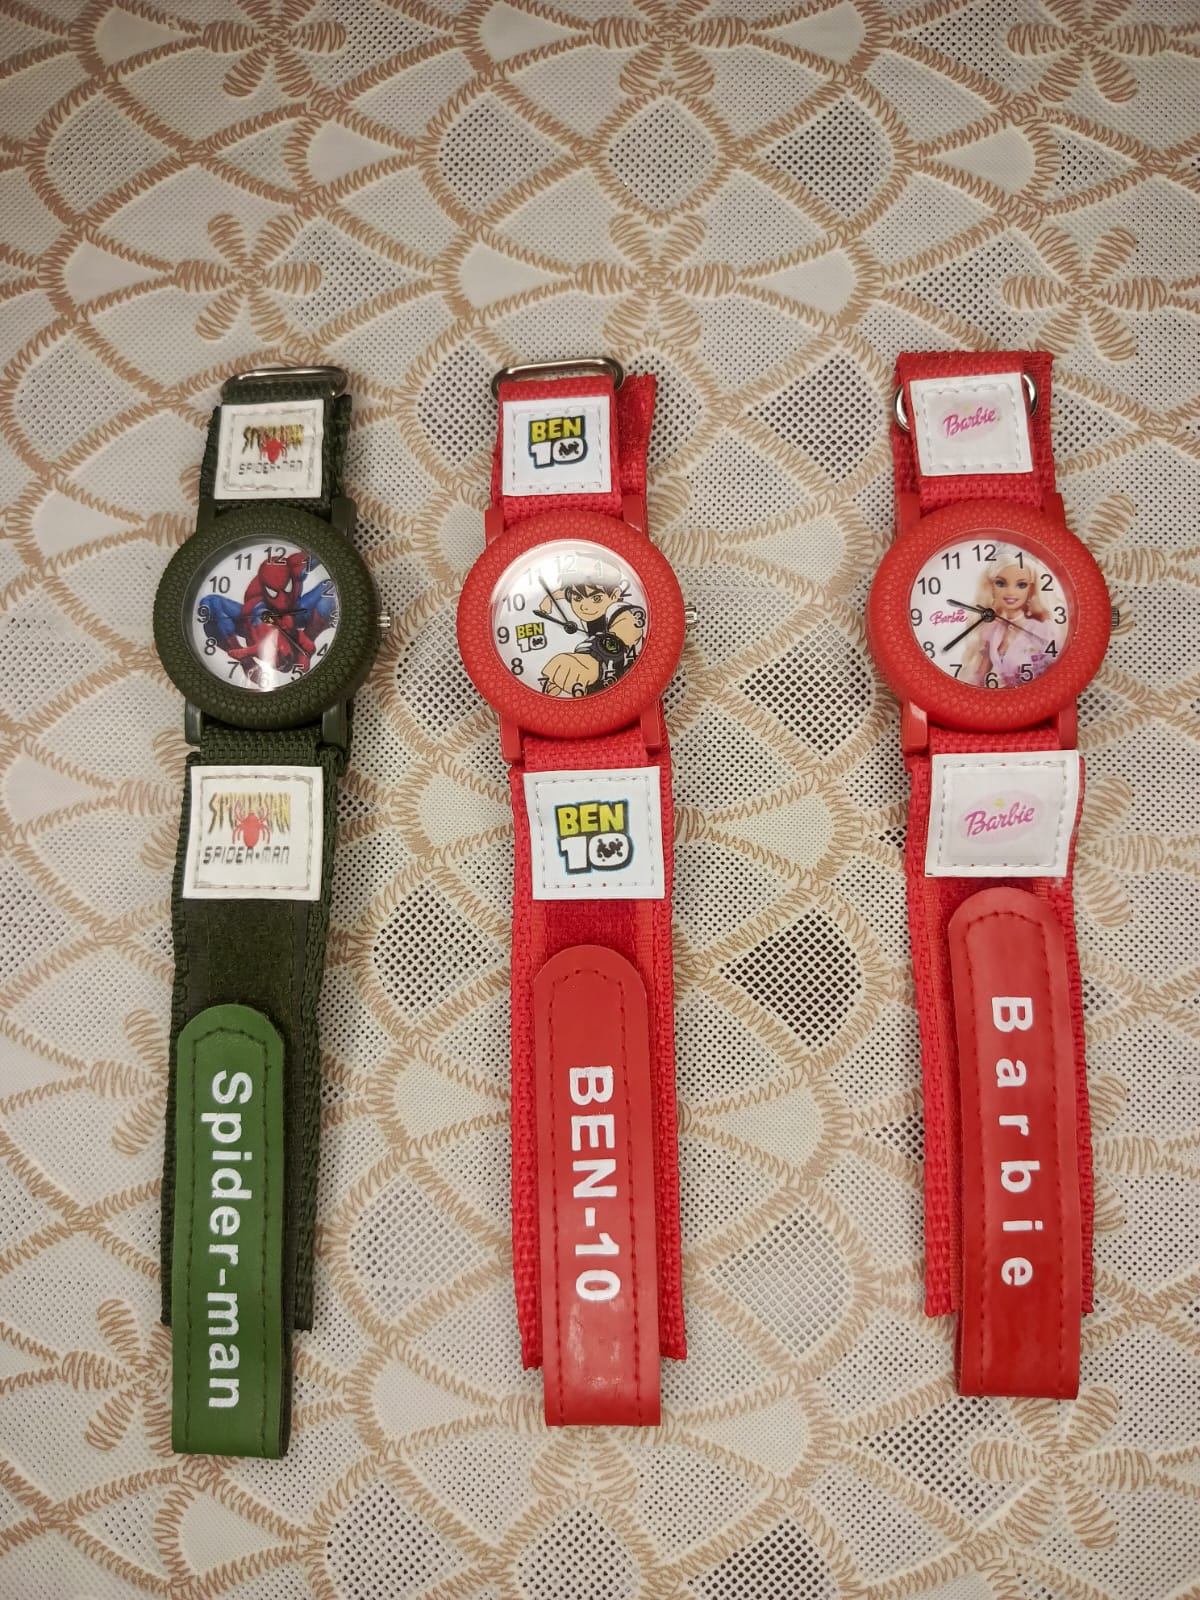 Watches for Kids Spiderman, Benten, Barbie doll Watches for kids